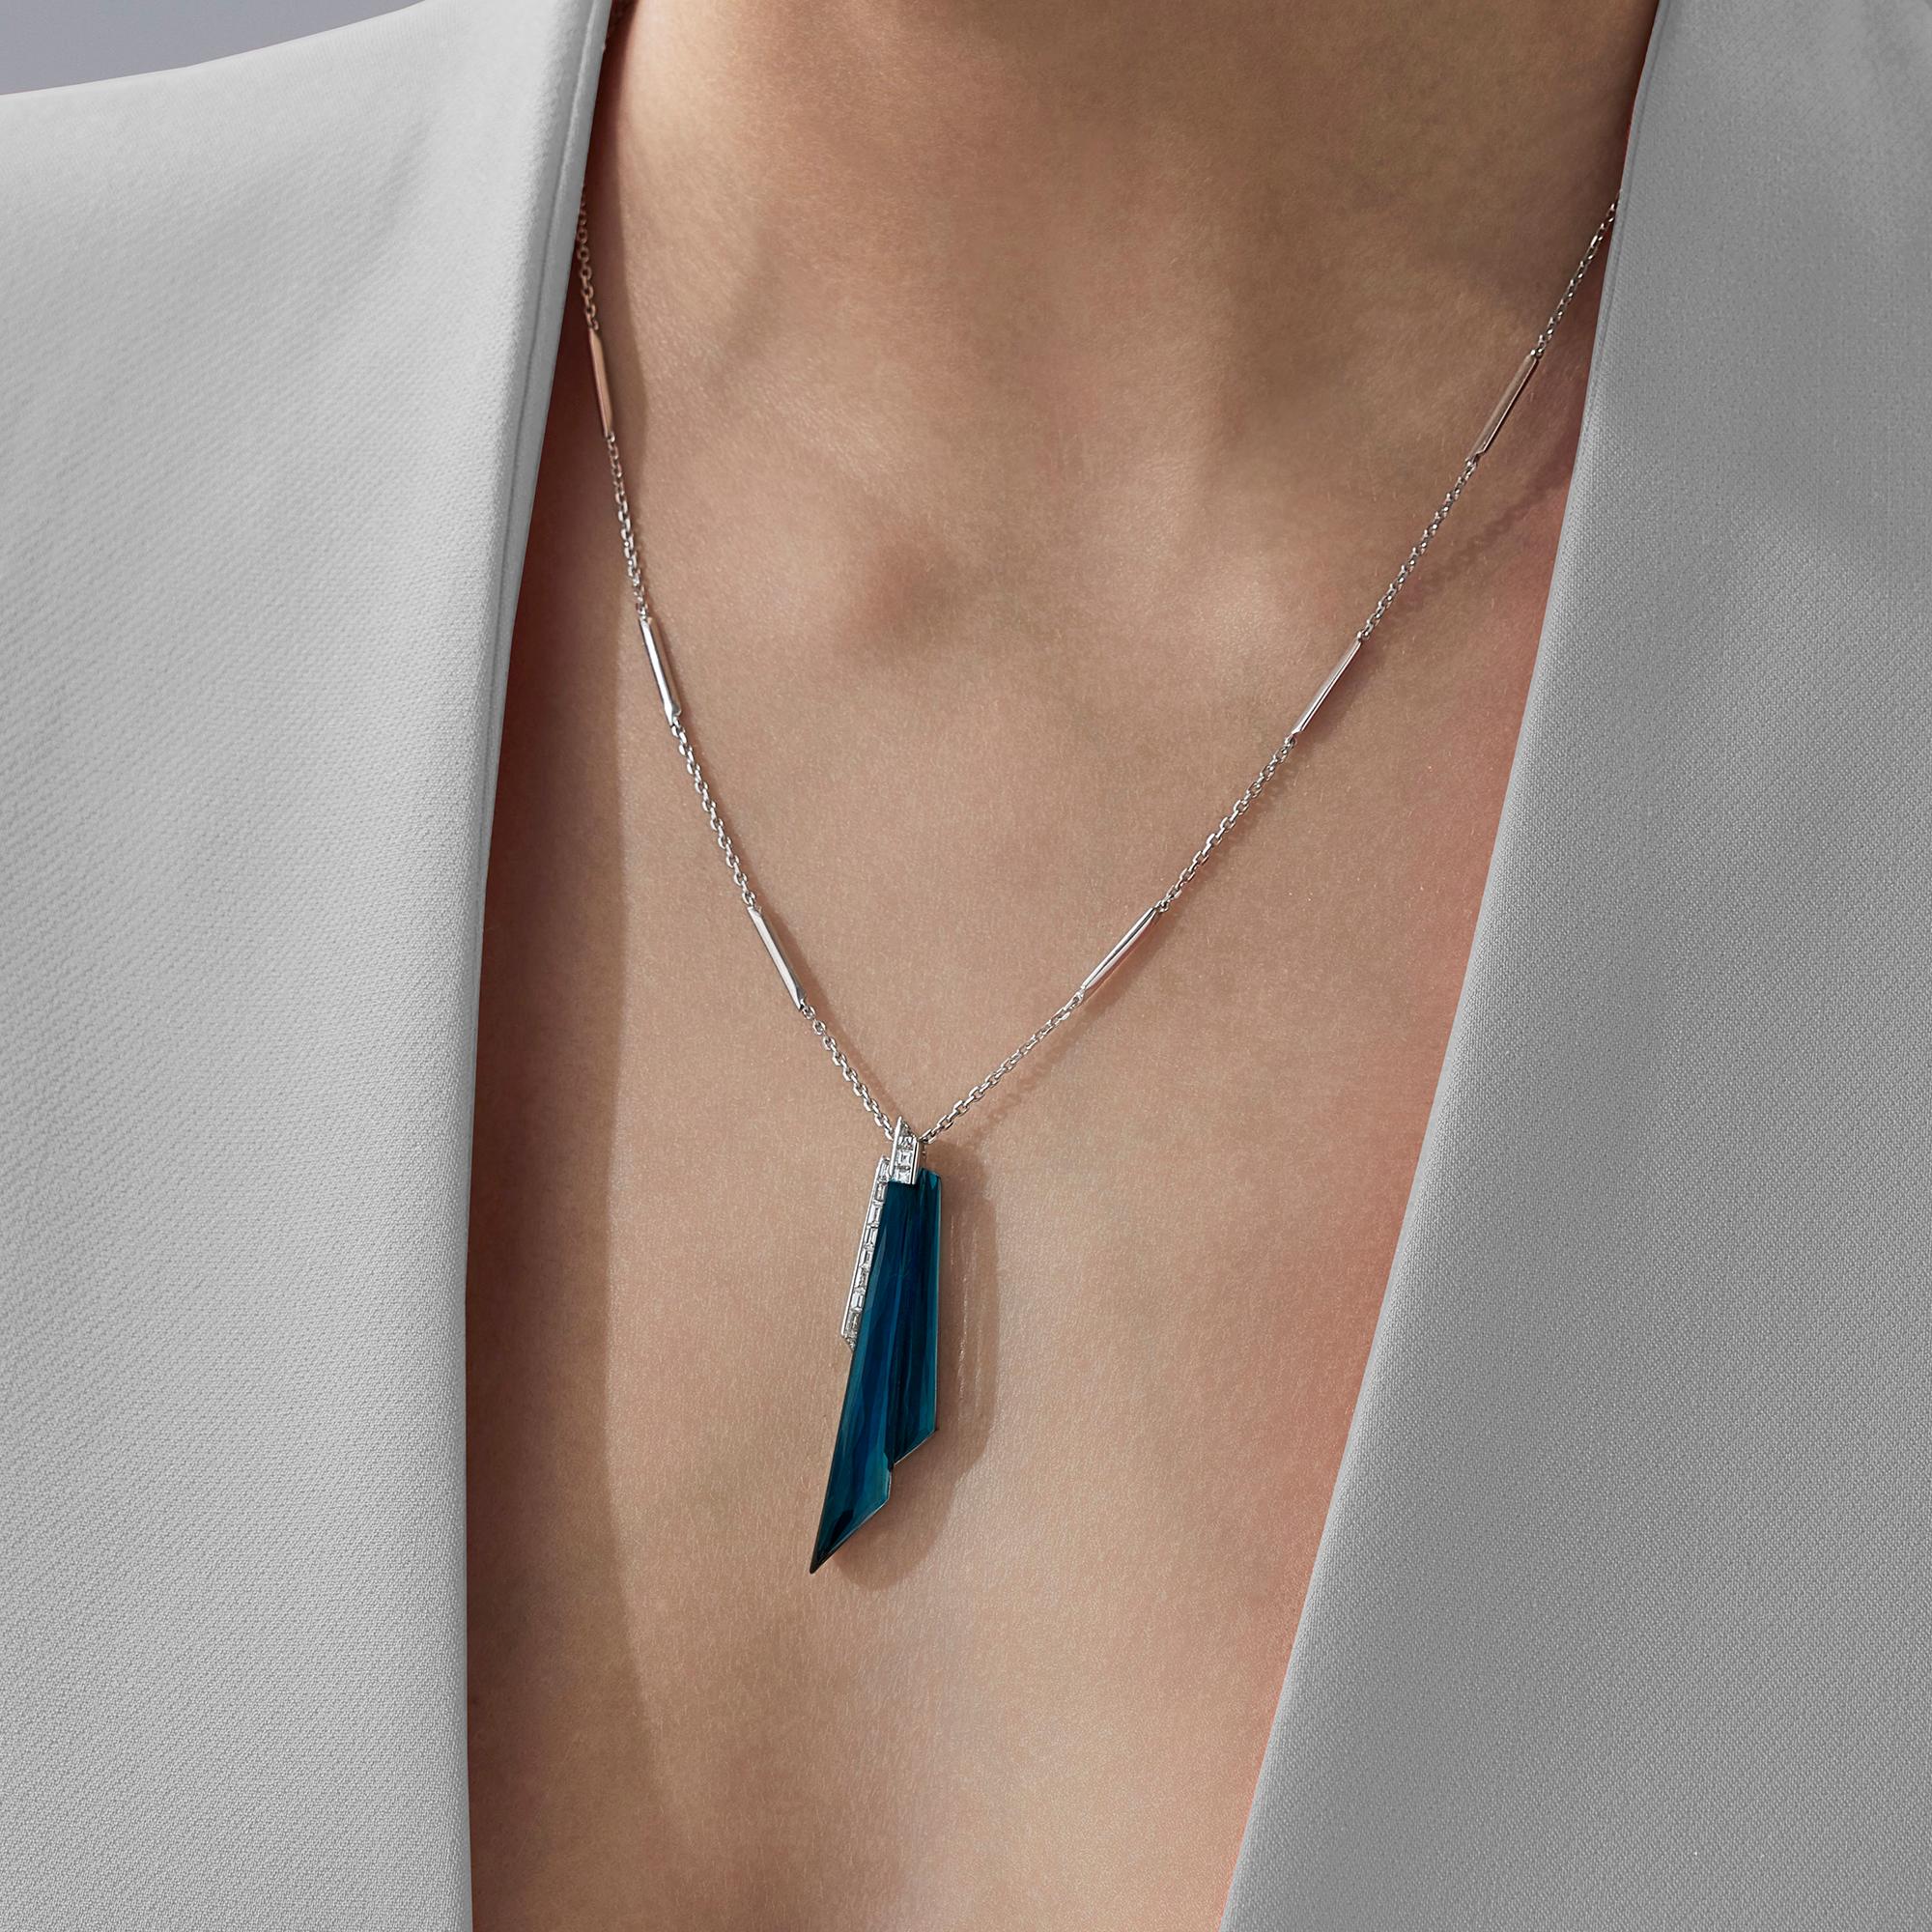 'CH₂' celebrates 25 years of the Crystal Haze effect created by Stephen Webster, introducing a new and exciting colour palette to fine jewellery. Retaining the distinct magic that made Crystal Haze so unique, 'CH₂' is reimagined as a contemporary